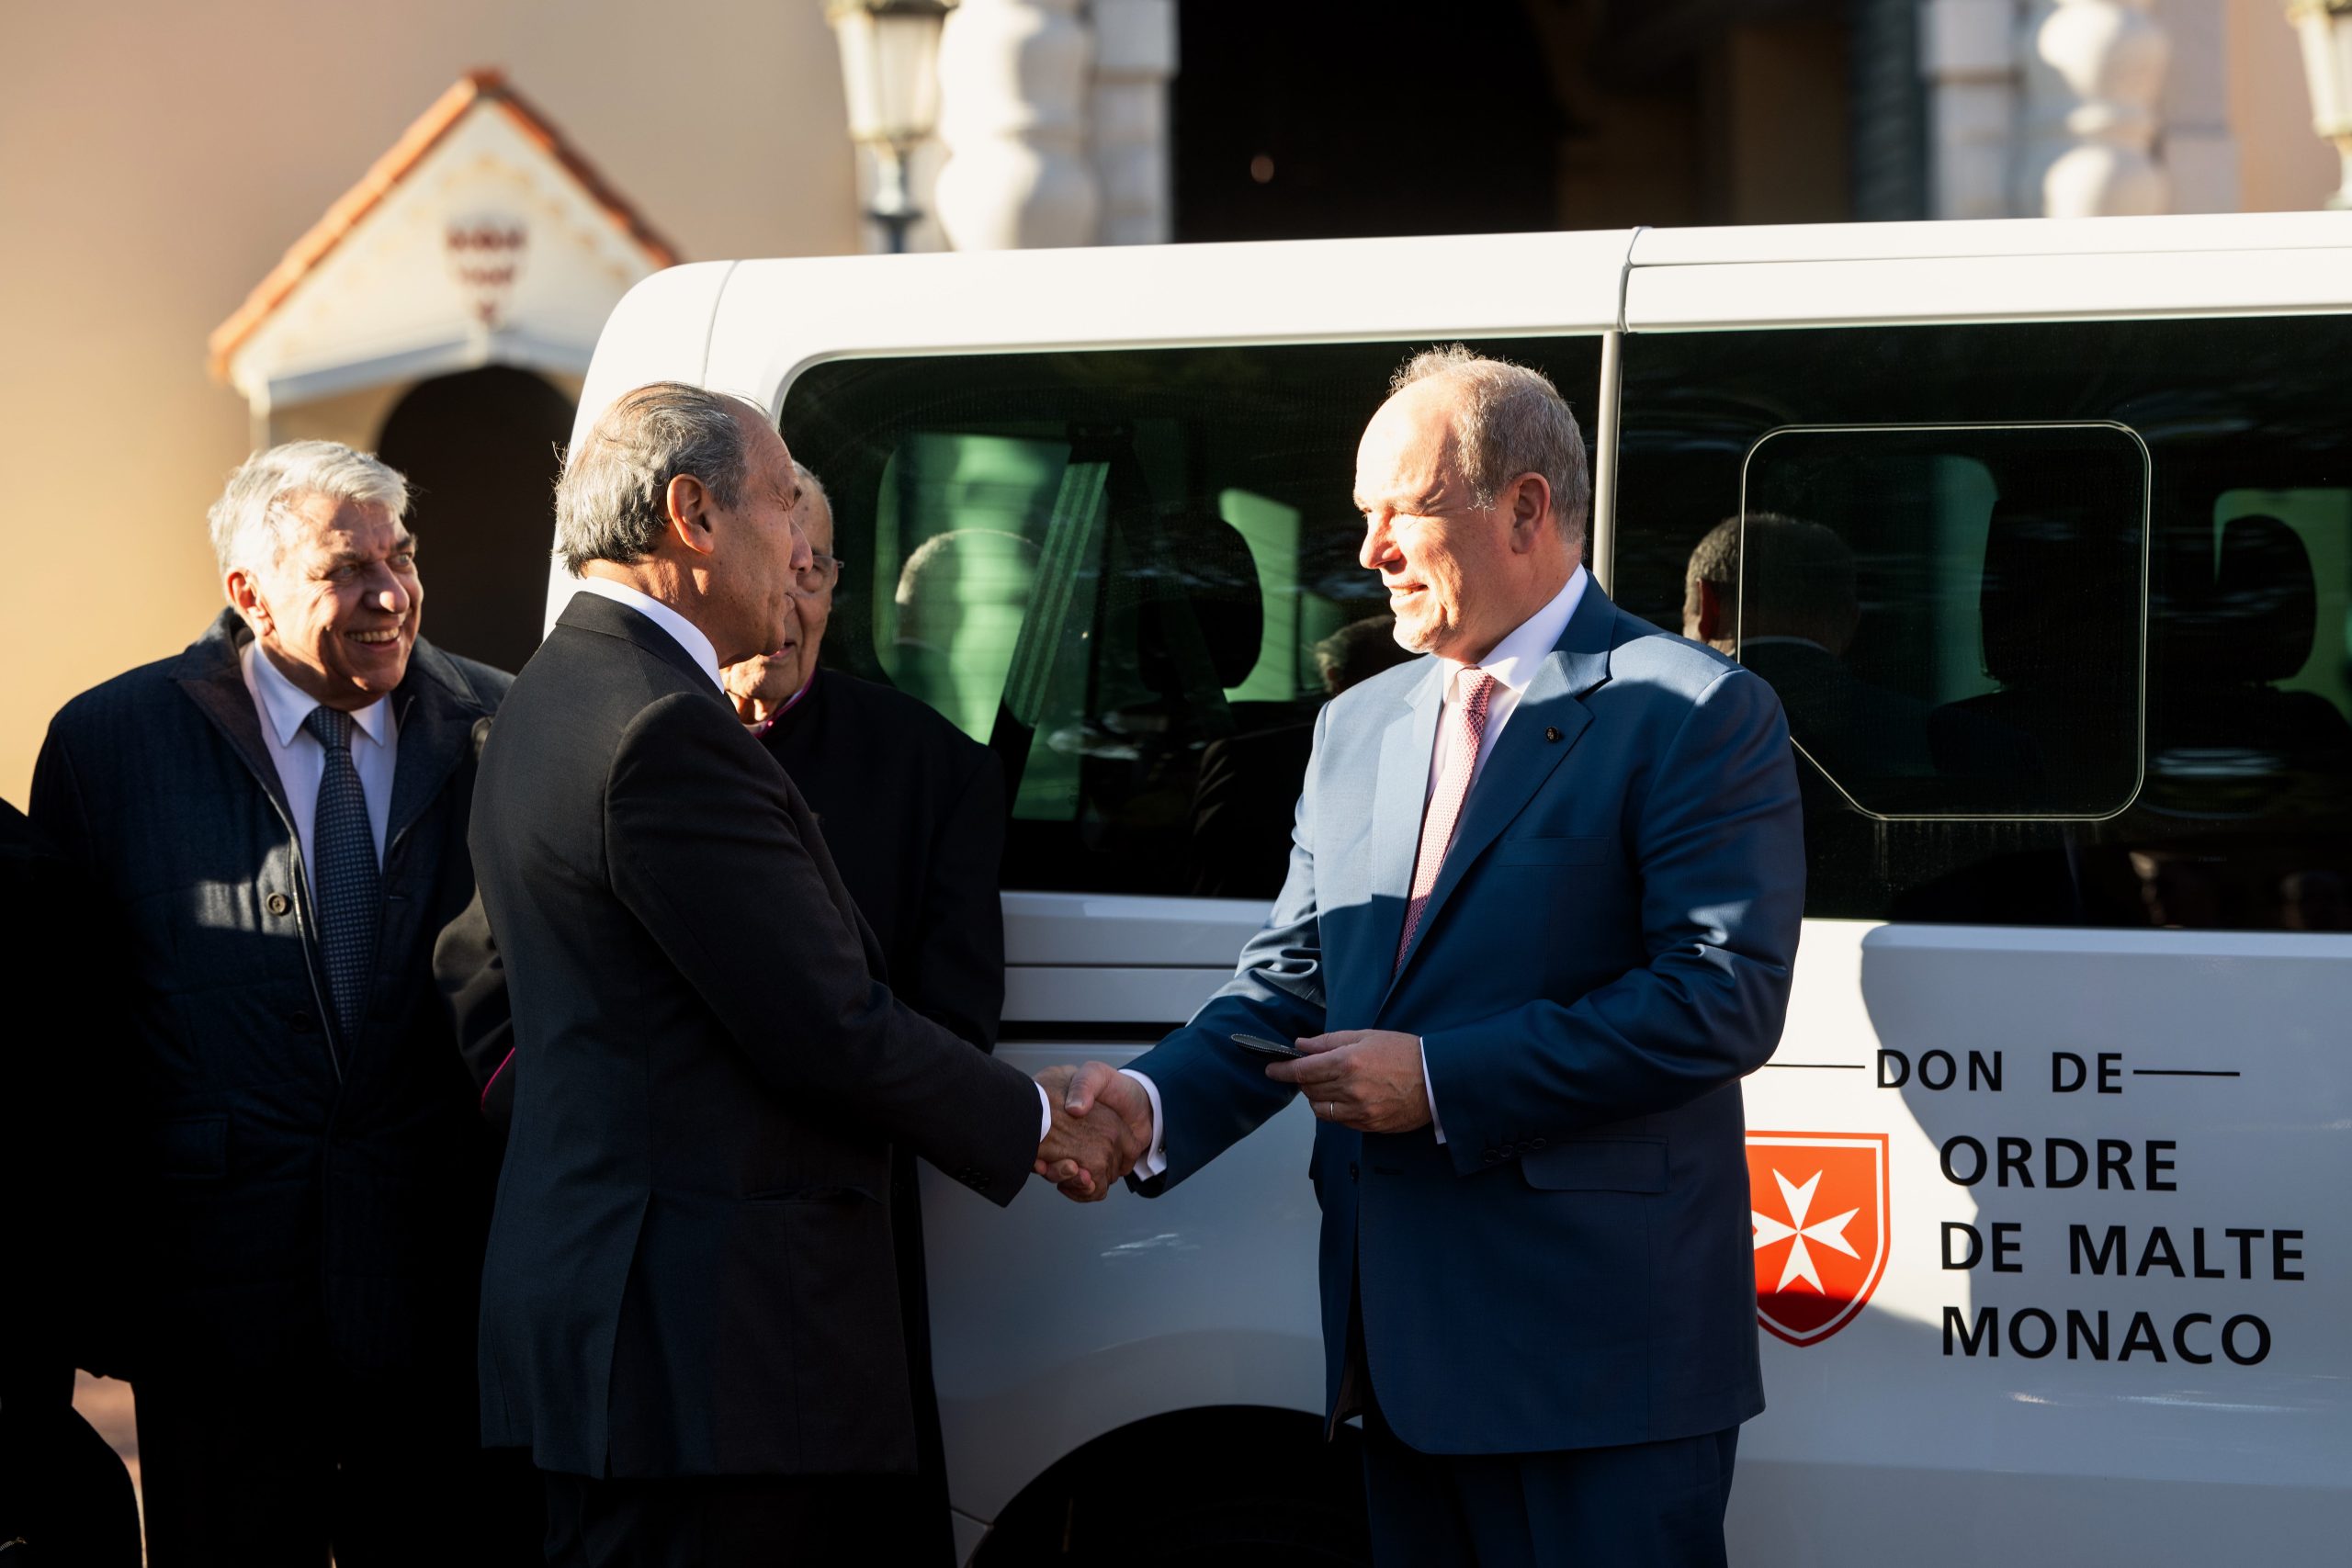 Order of Malta’s Monegasque Association donates a minibus for the disabled